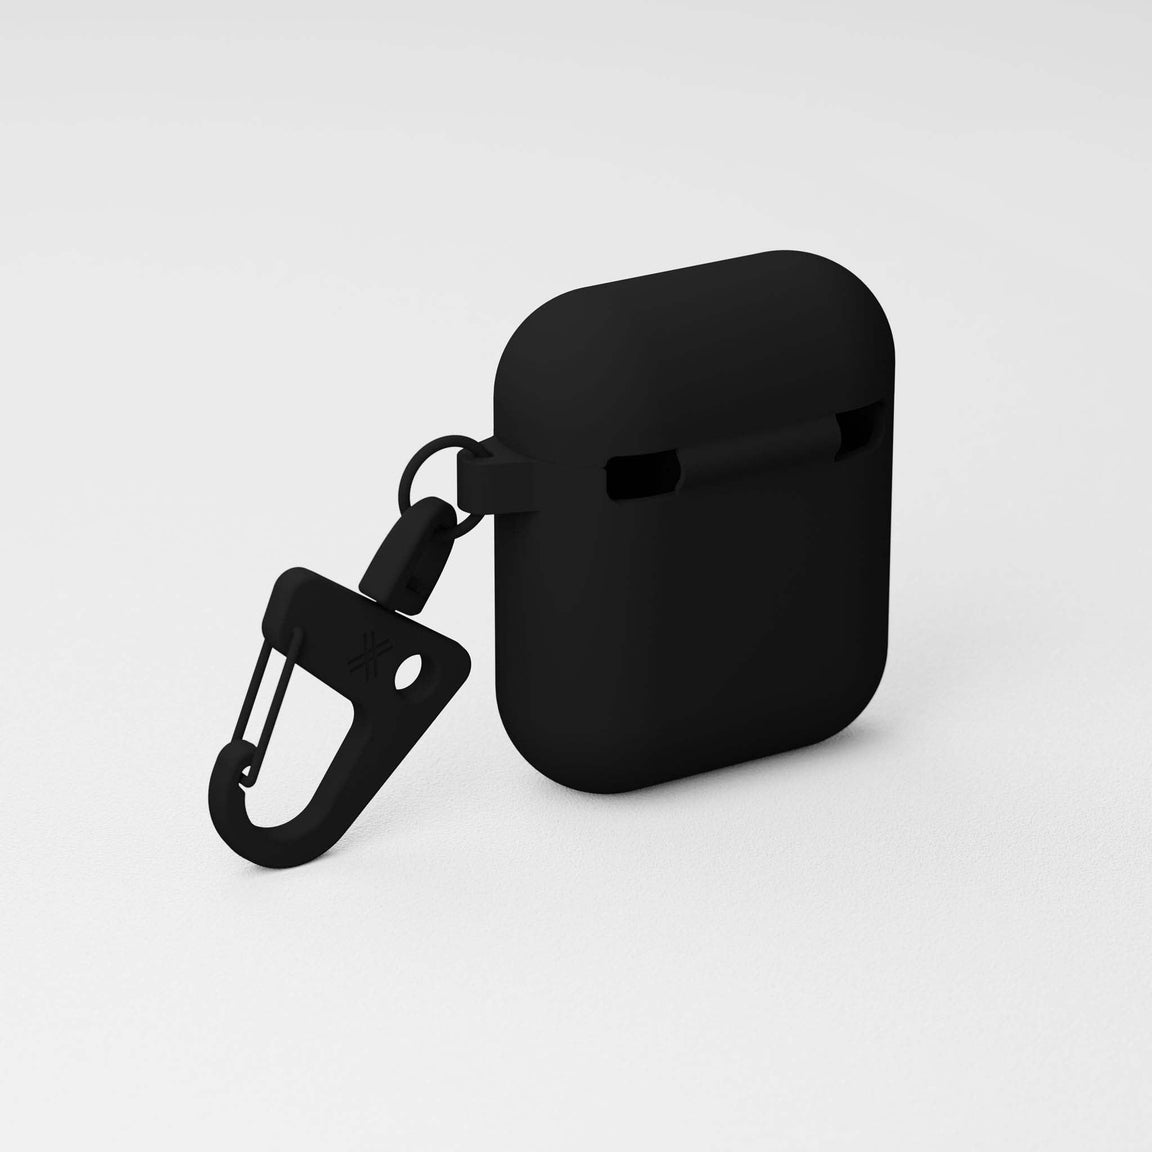 Black silicone Apple AirPods Case 1st and 2nd generation with black carabiner hook | XOUXOU